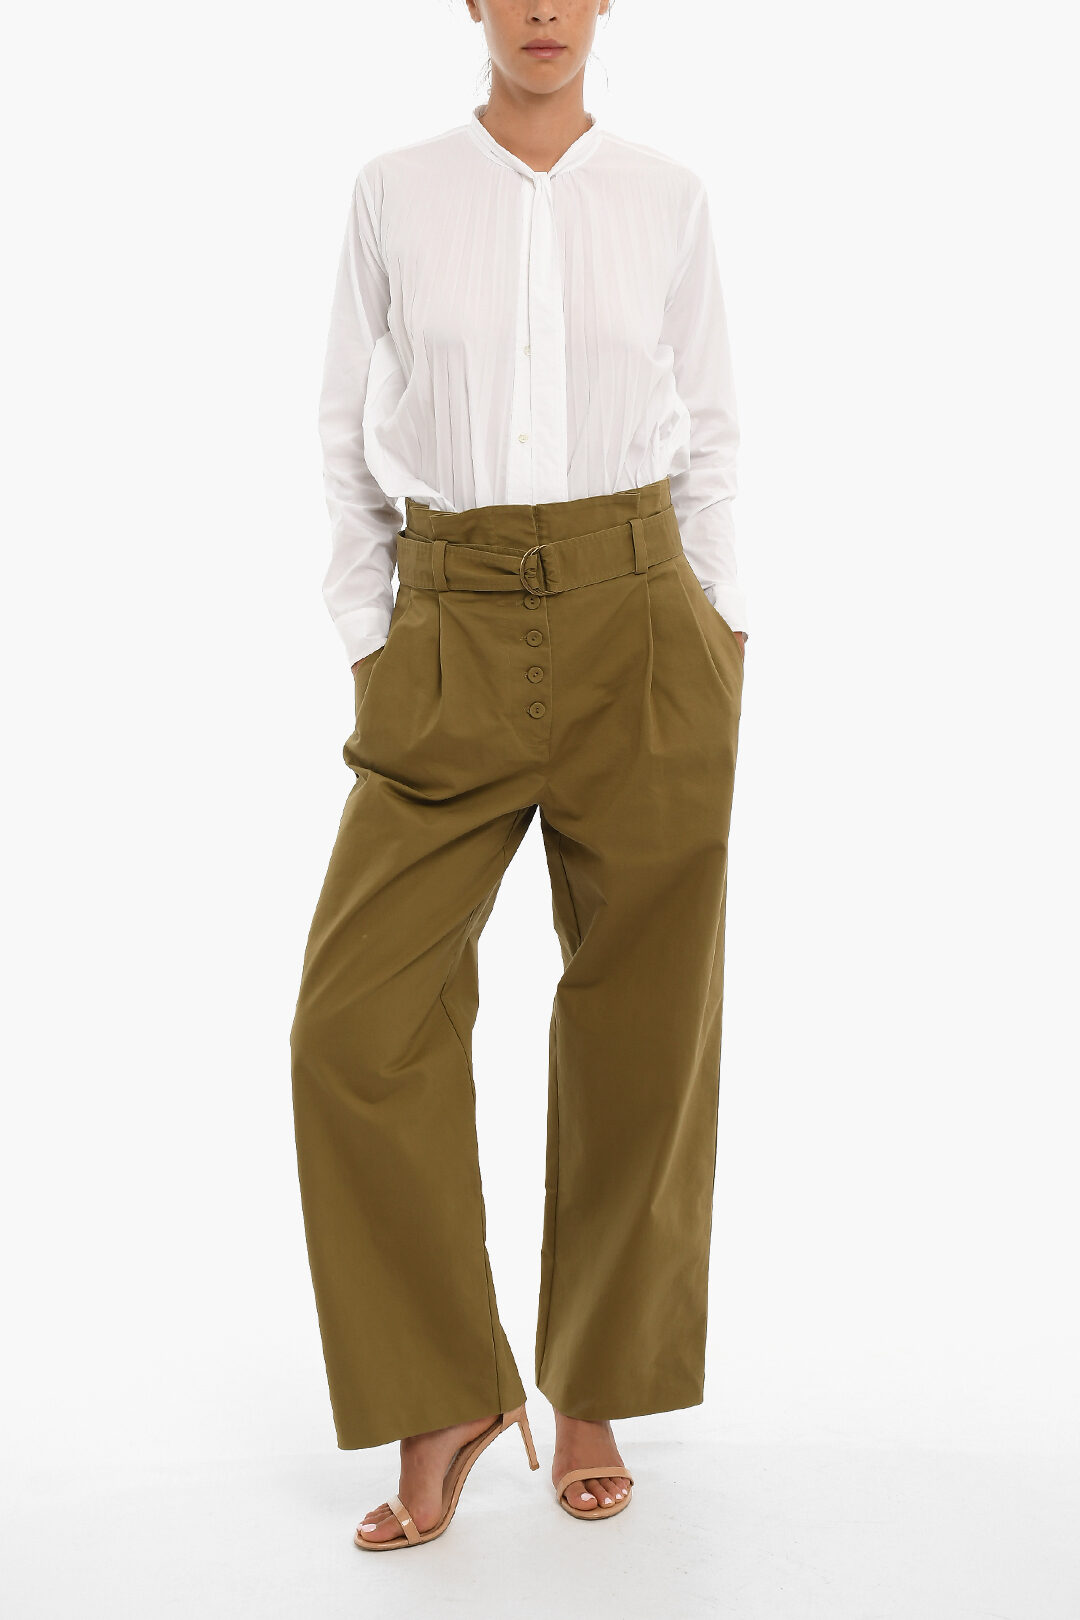 https://data.glamood.com/imgprodotto/belted-high-waisted-wide-fit-pants_1382491_zoom.jpg